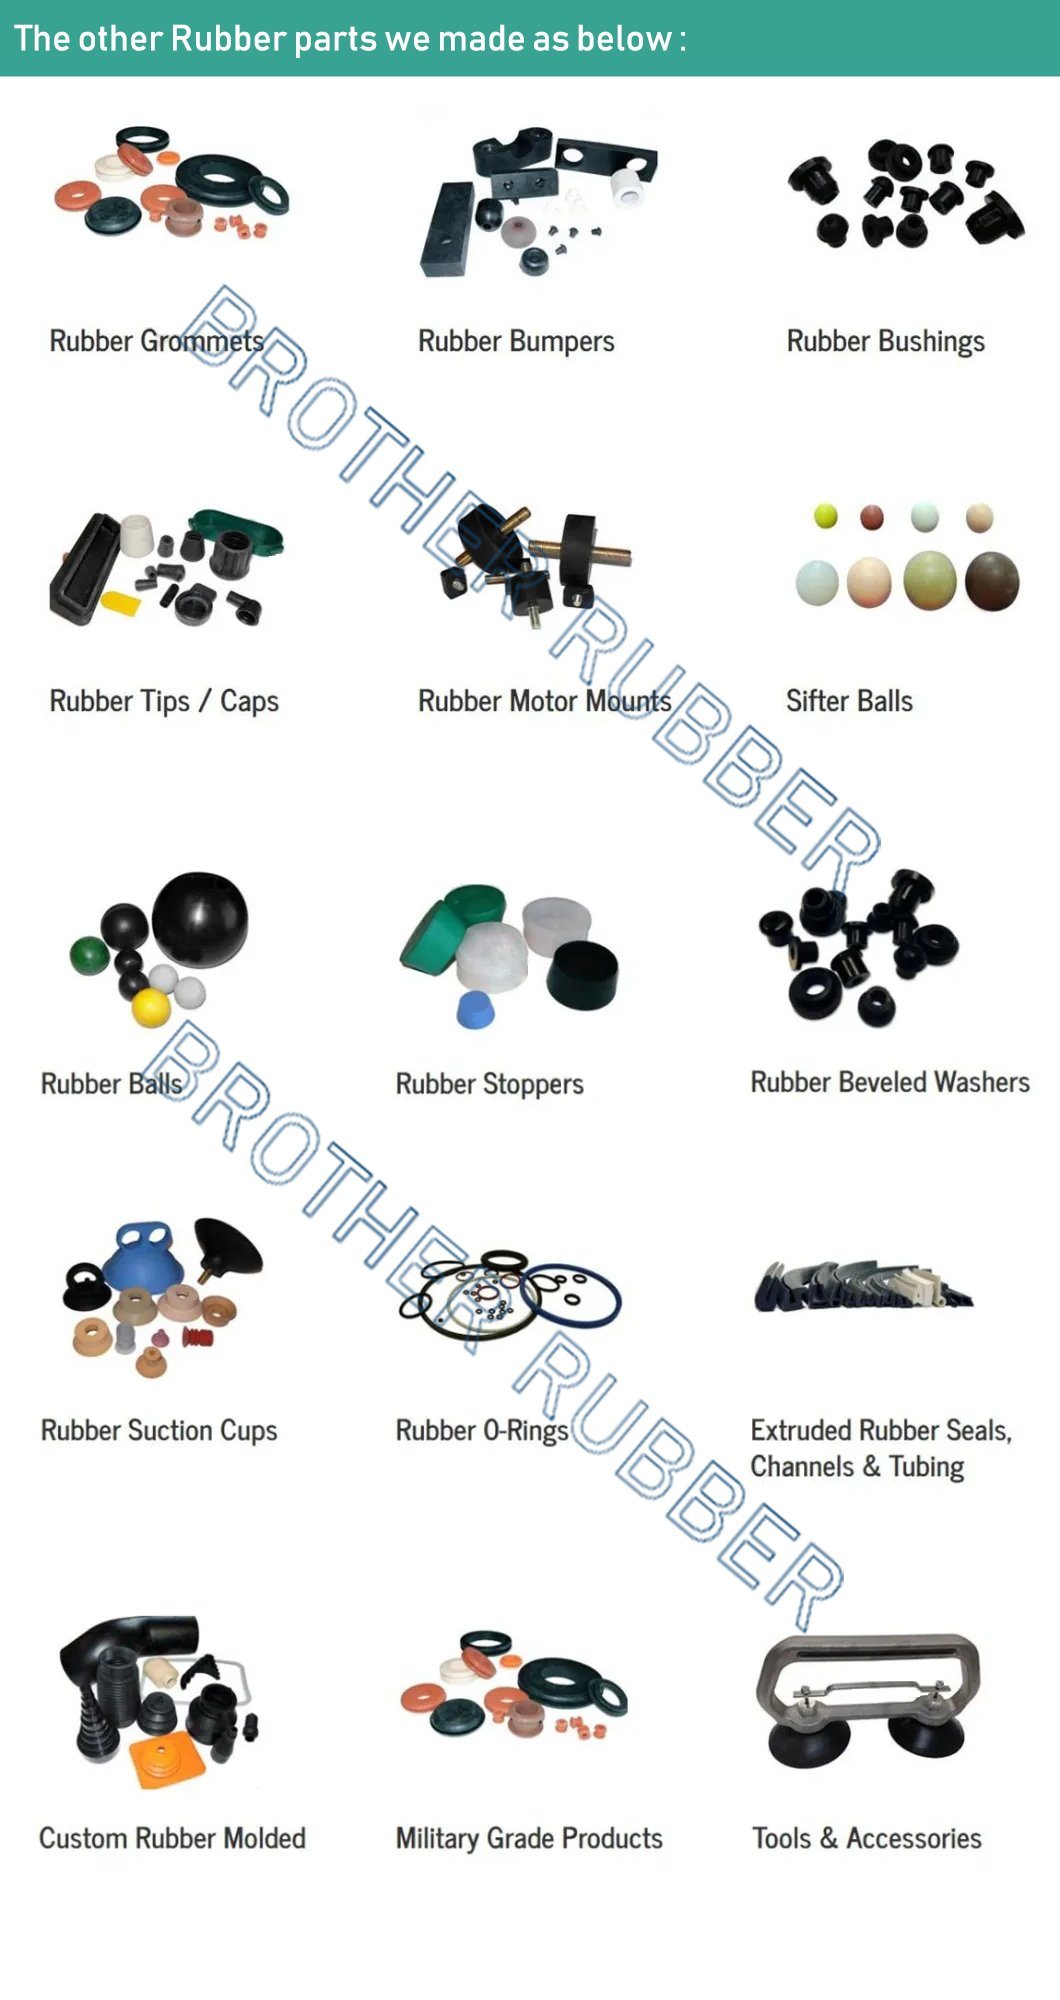 Rubber Sealing Strip/Extrusion Profile/Extruded EPDM Rubber Seal